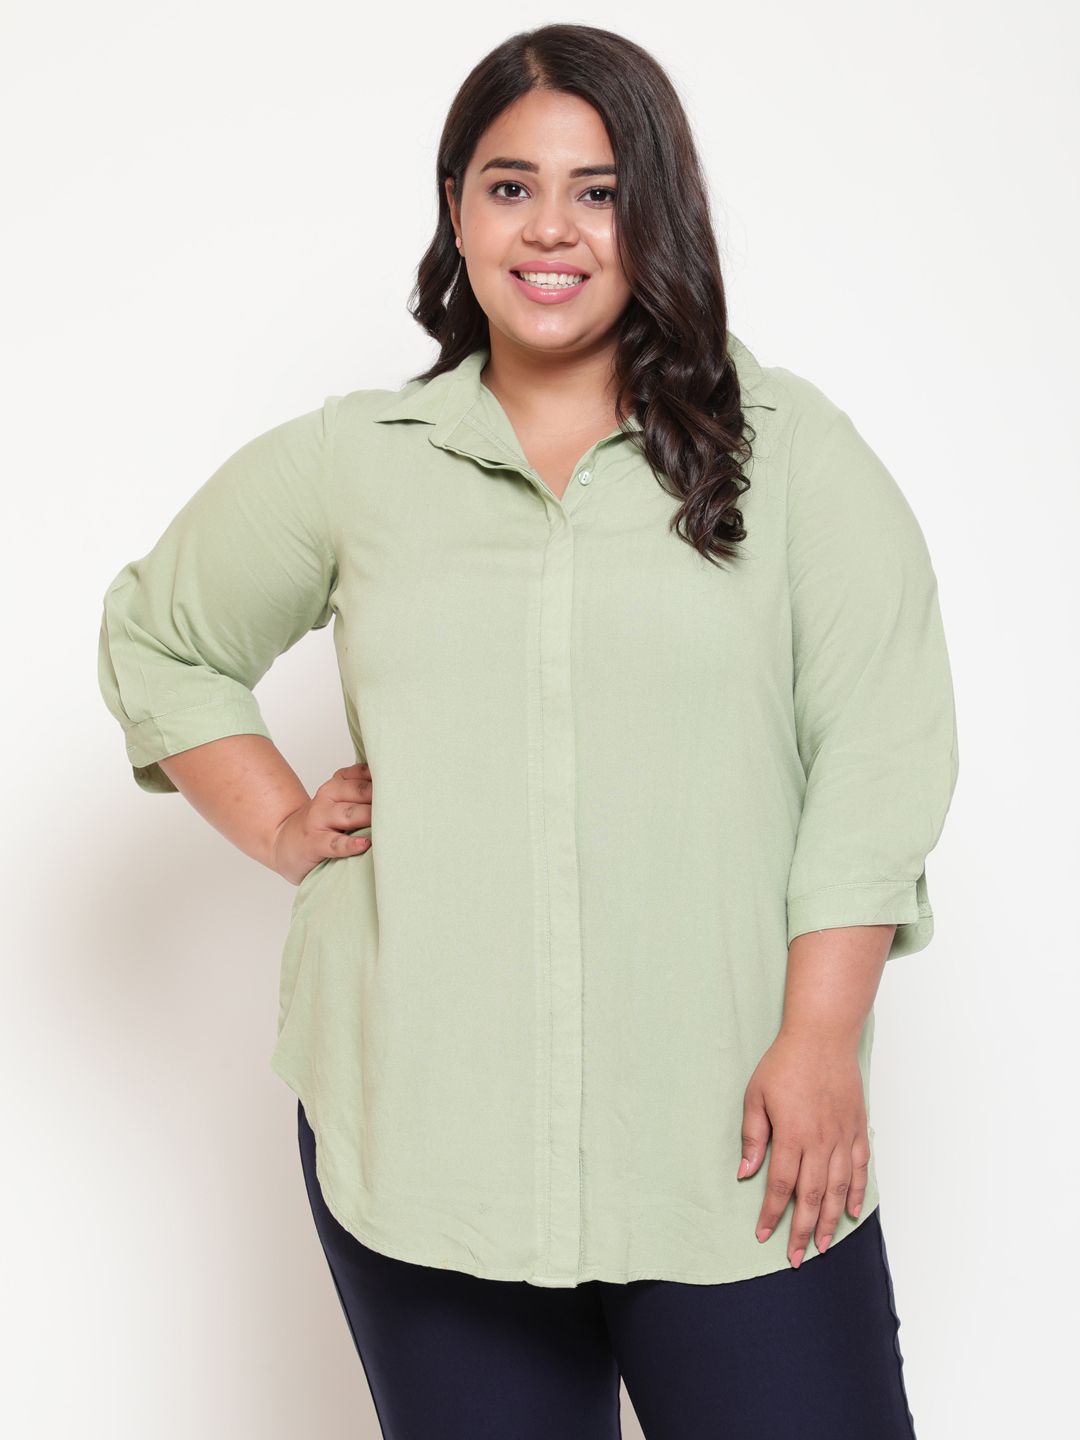 Amydus Green Roll-Up Sleeves Shirt Style Top Price in India